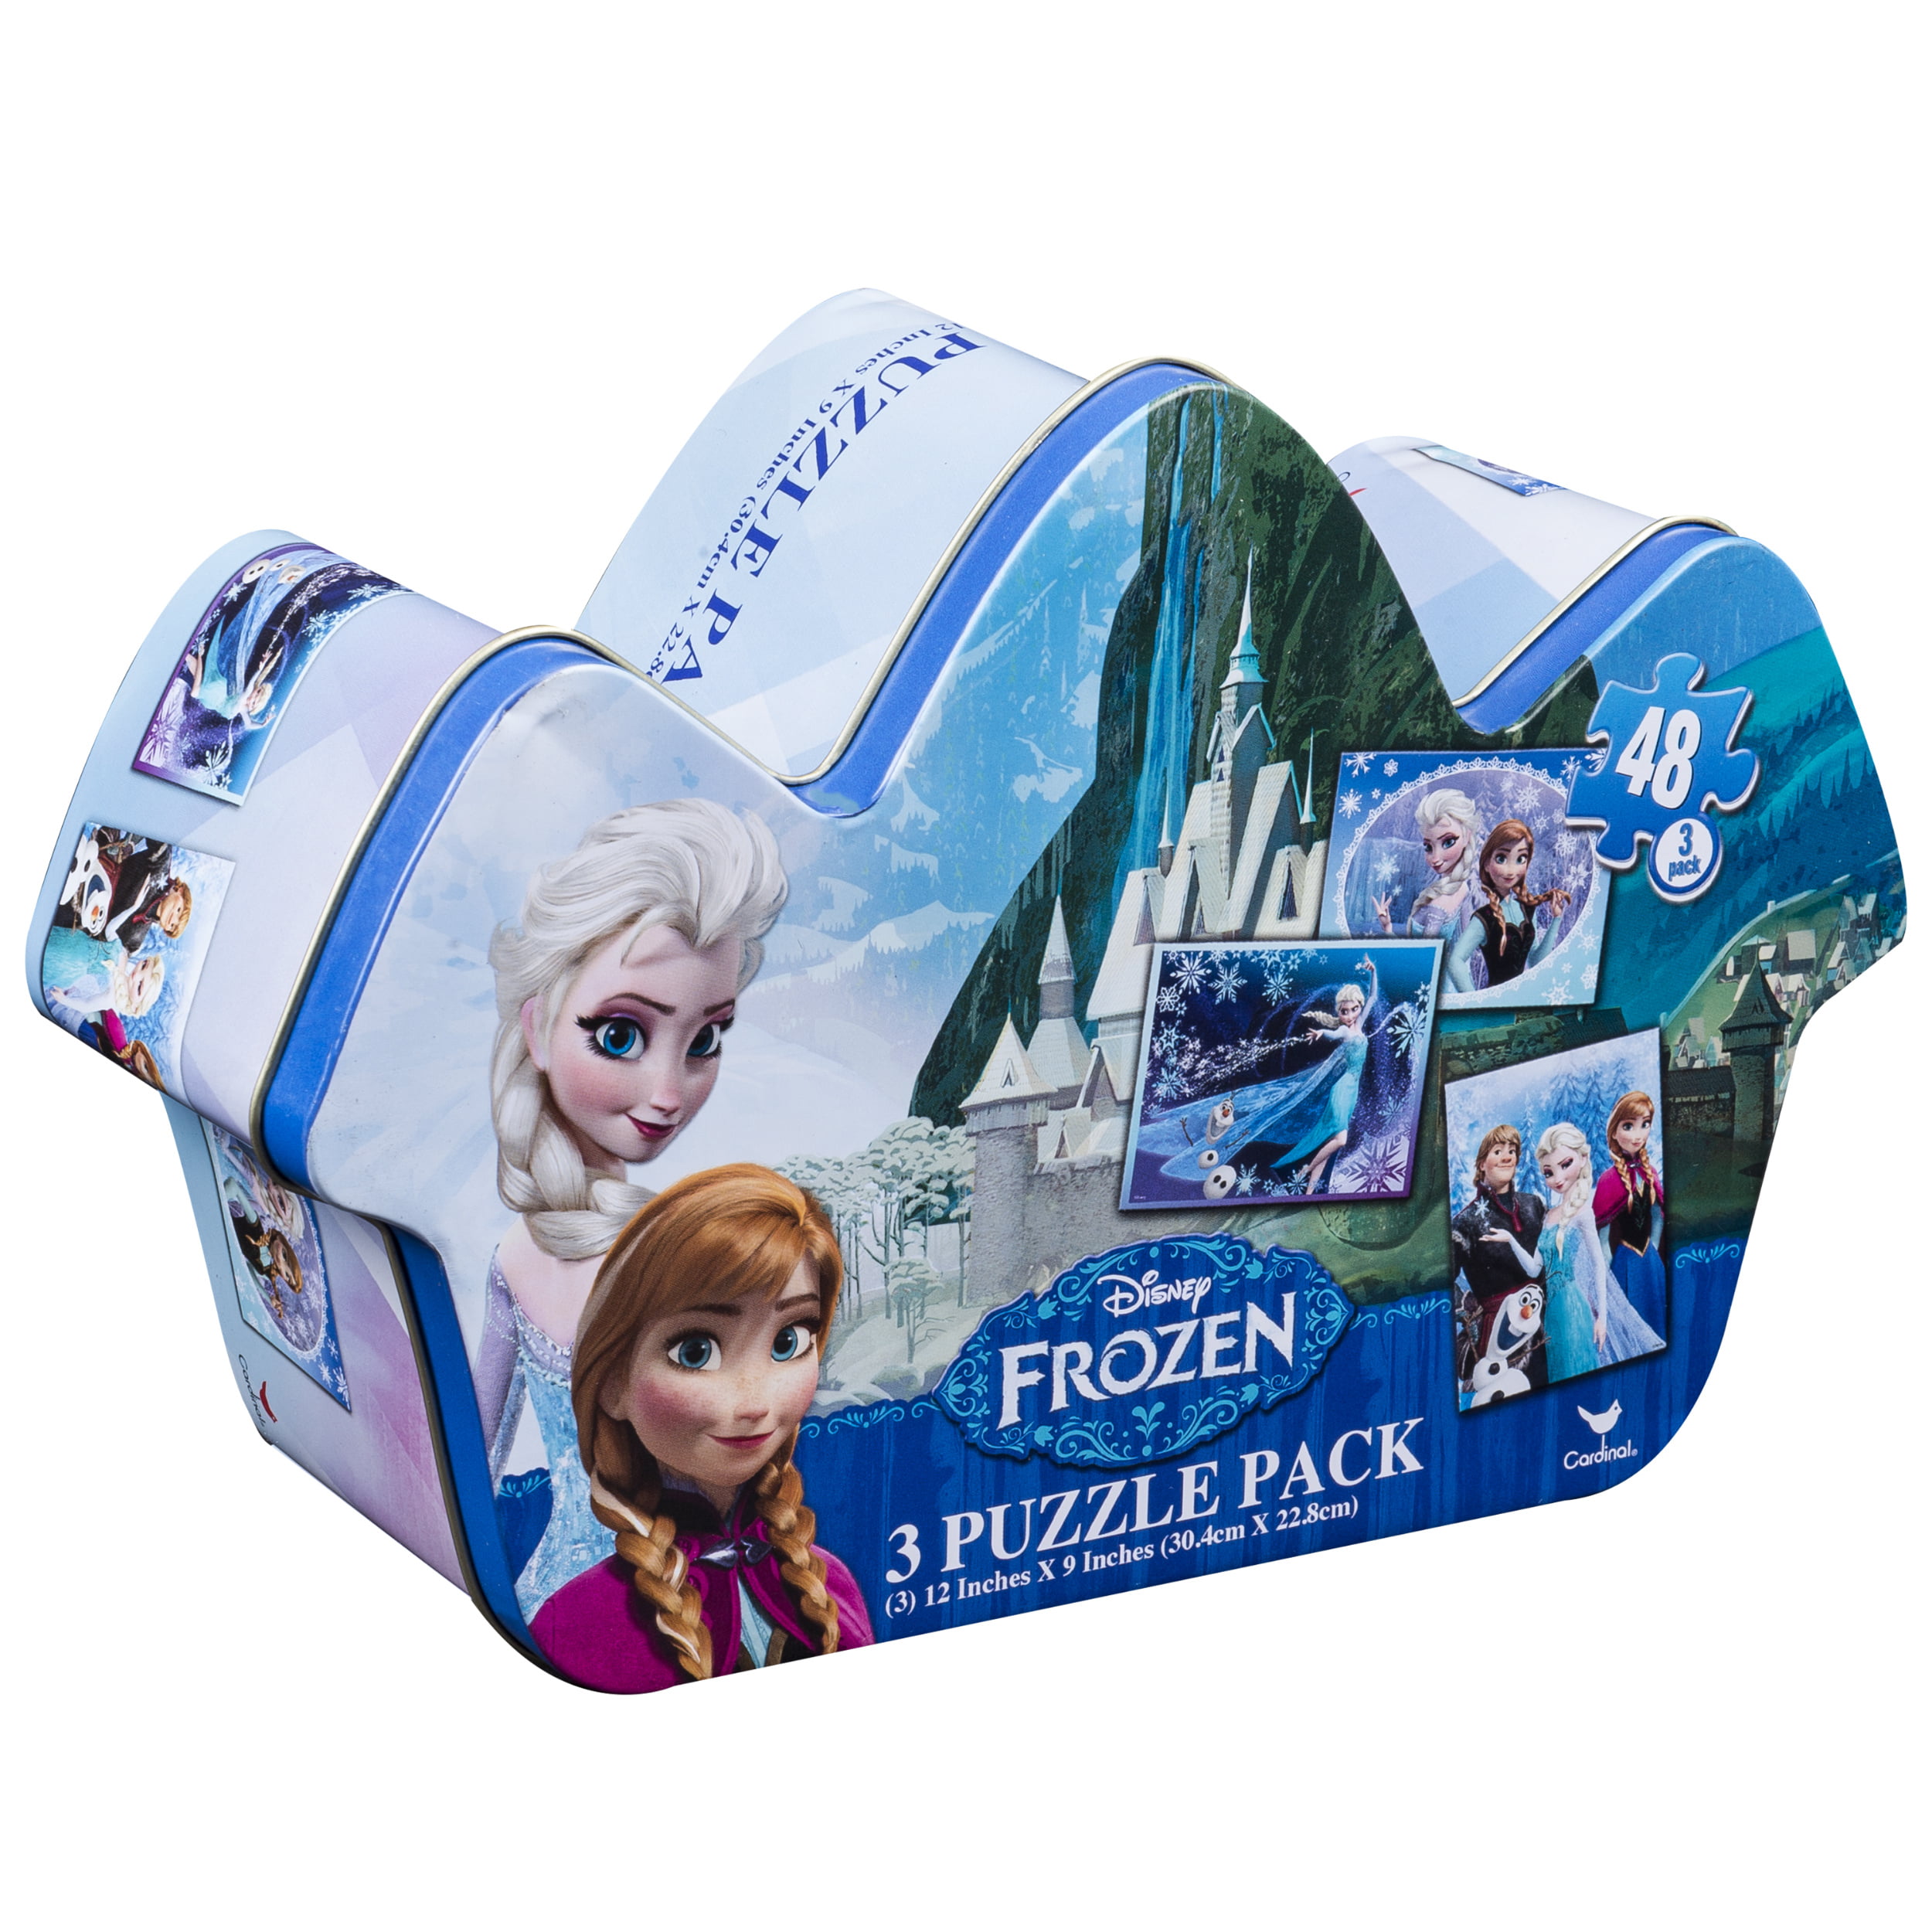 Frozen-Anna & Elsa 48 Piece Disney Puzzle`15 Inches X 12 1/2 Inches New>Free 2US 